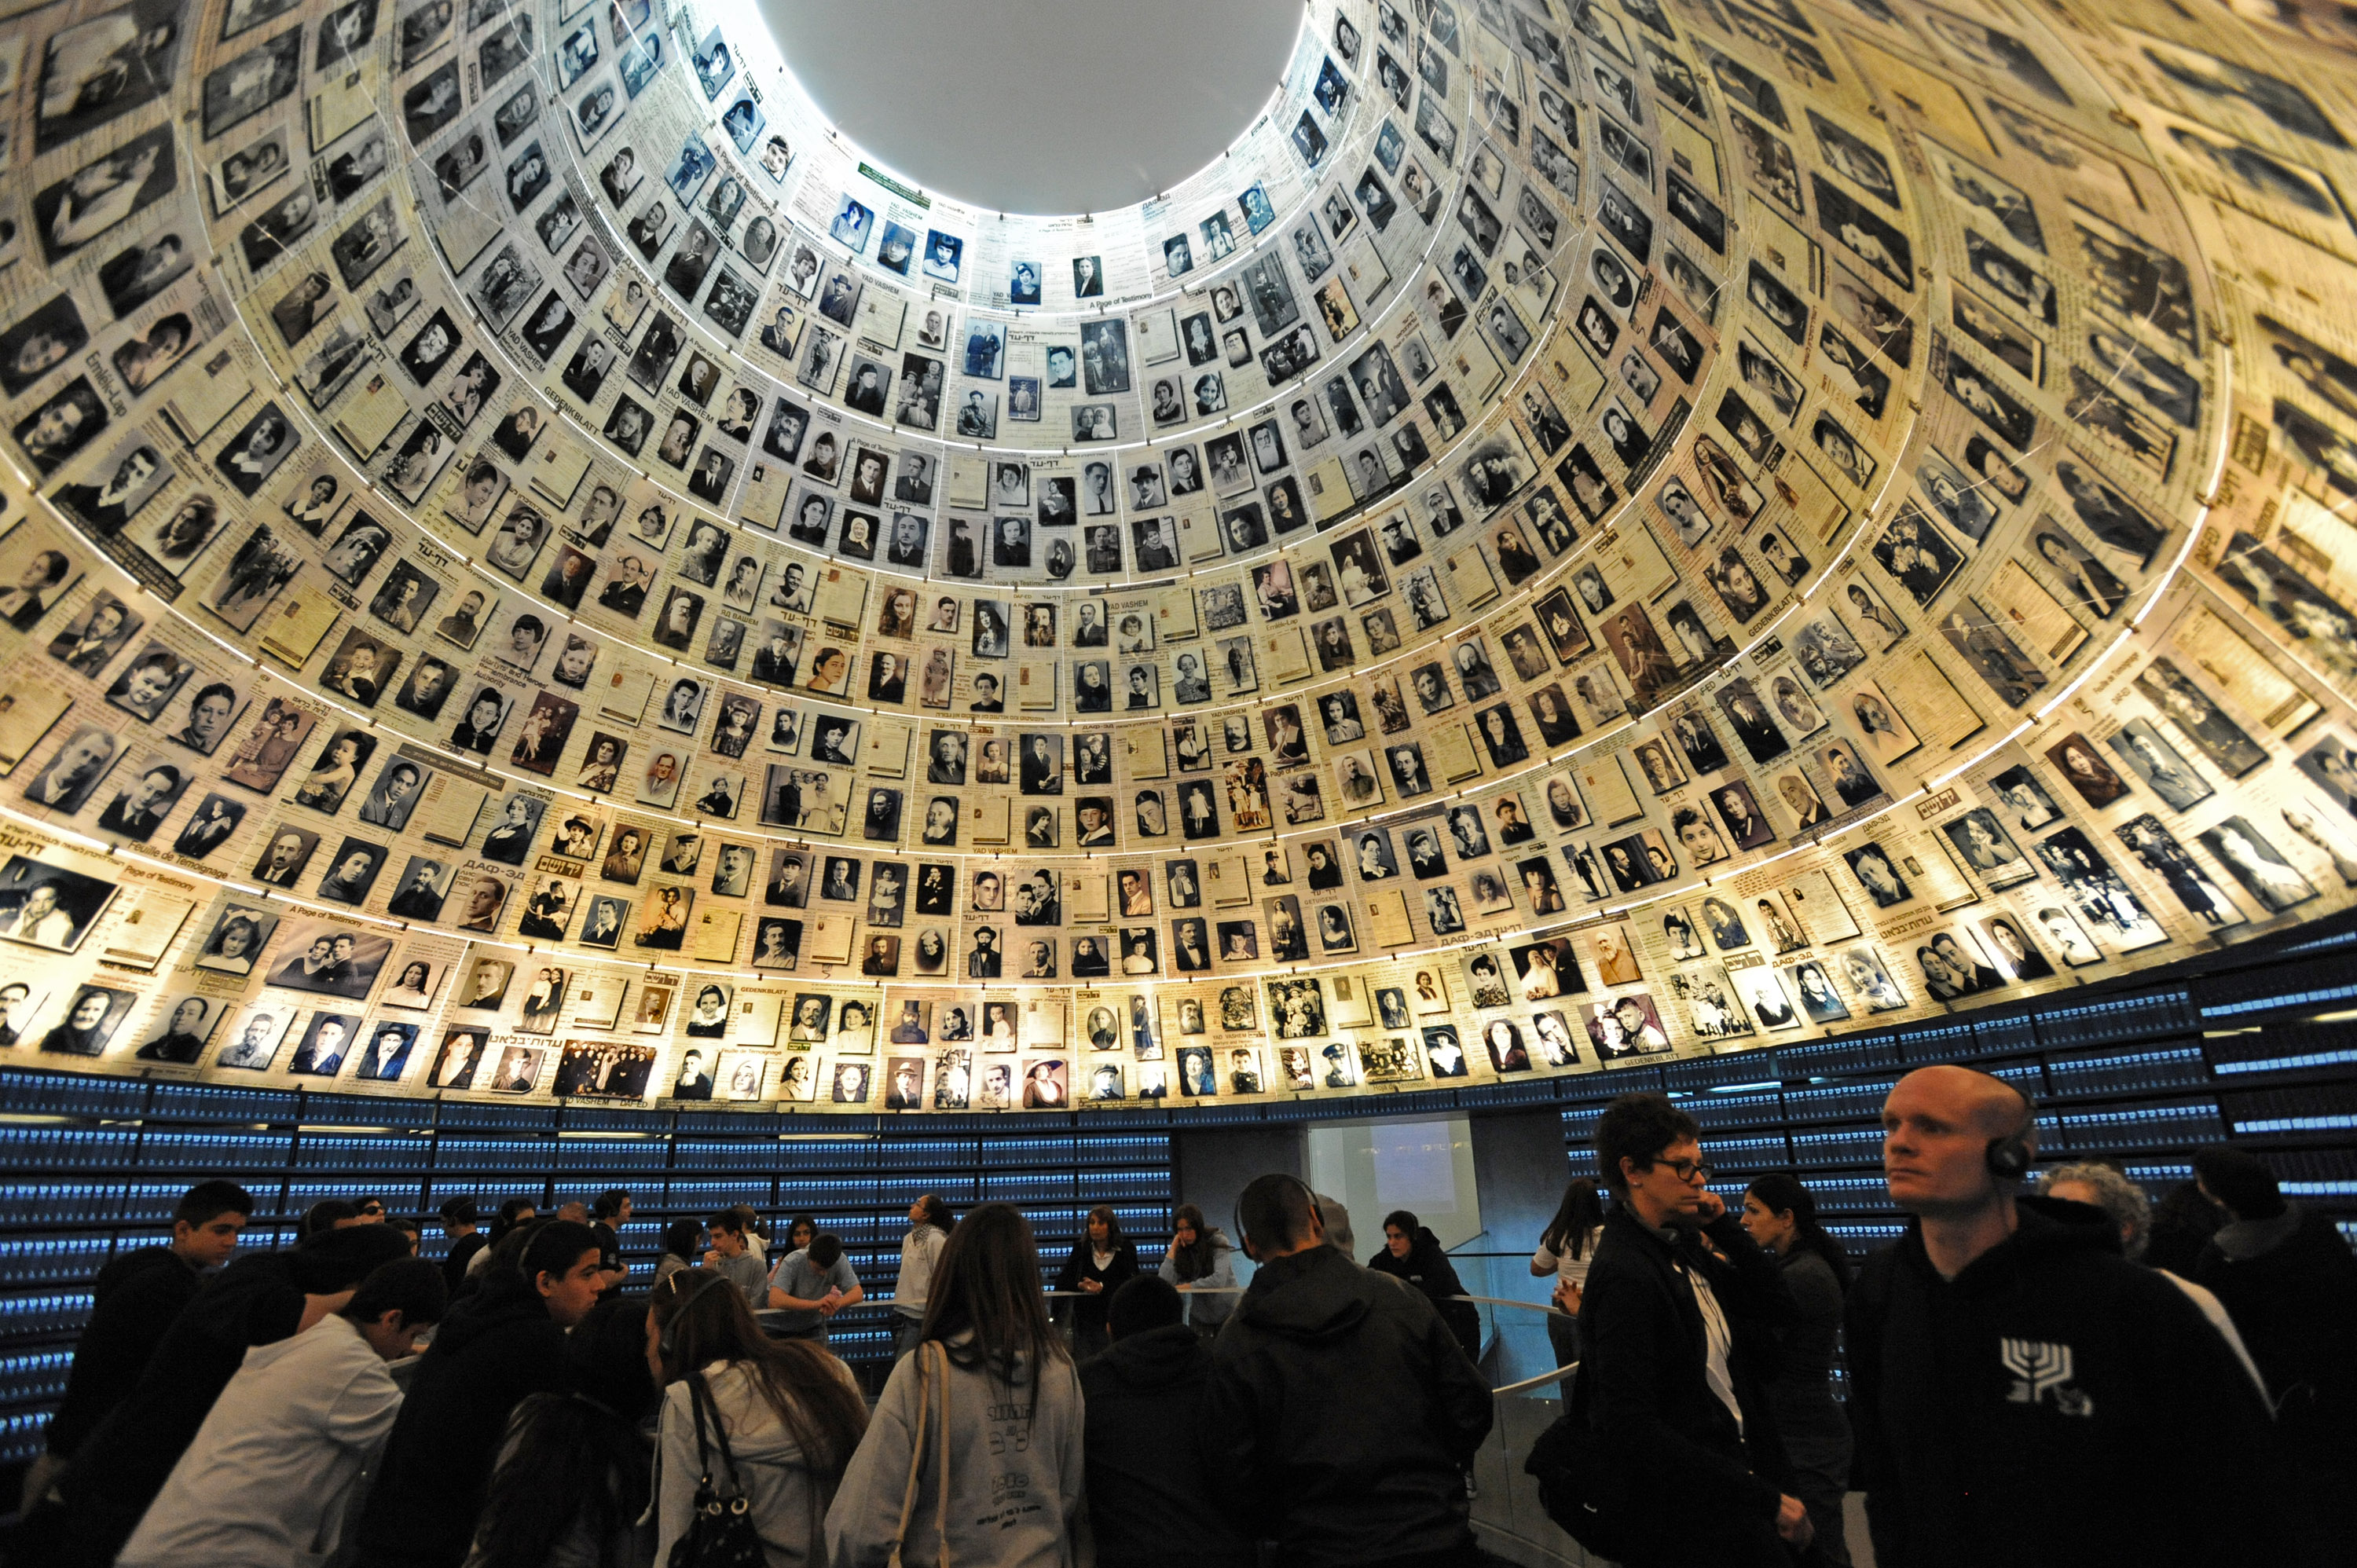 Tourists visit the Hall of Names in the Yad Vashem Holocaust Museum in Jerusalem on the eve of Israel's Holocaust Remembrance Day